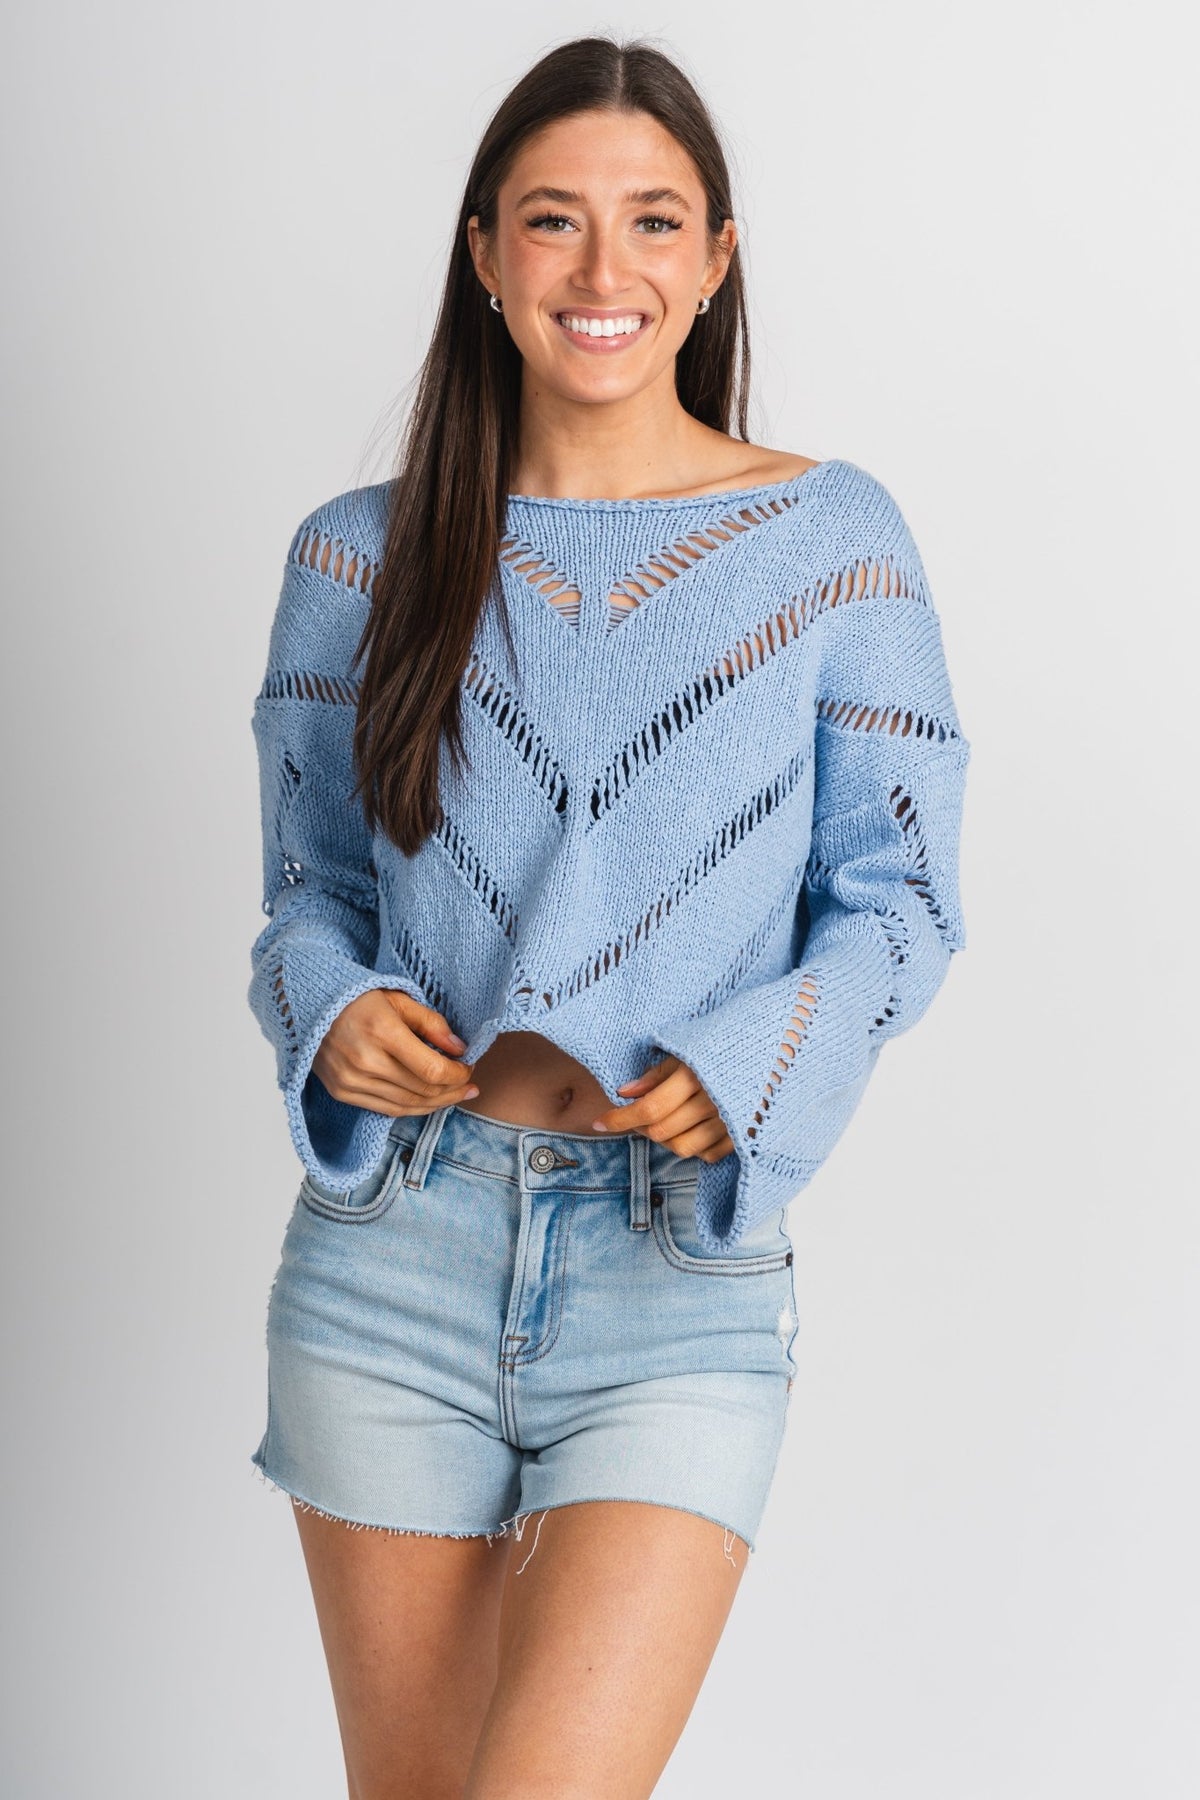 Distressed crop sweater periwinkle – Boutique Sweaters | Fashionable Sweaters at Lush Fashion Lounge Boutique in Oklahoma City